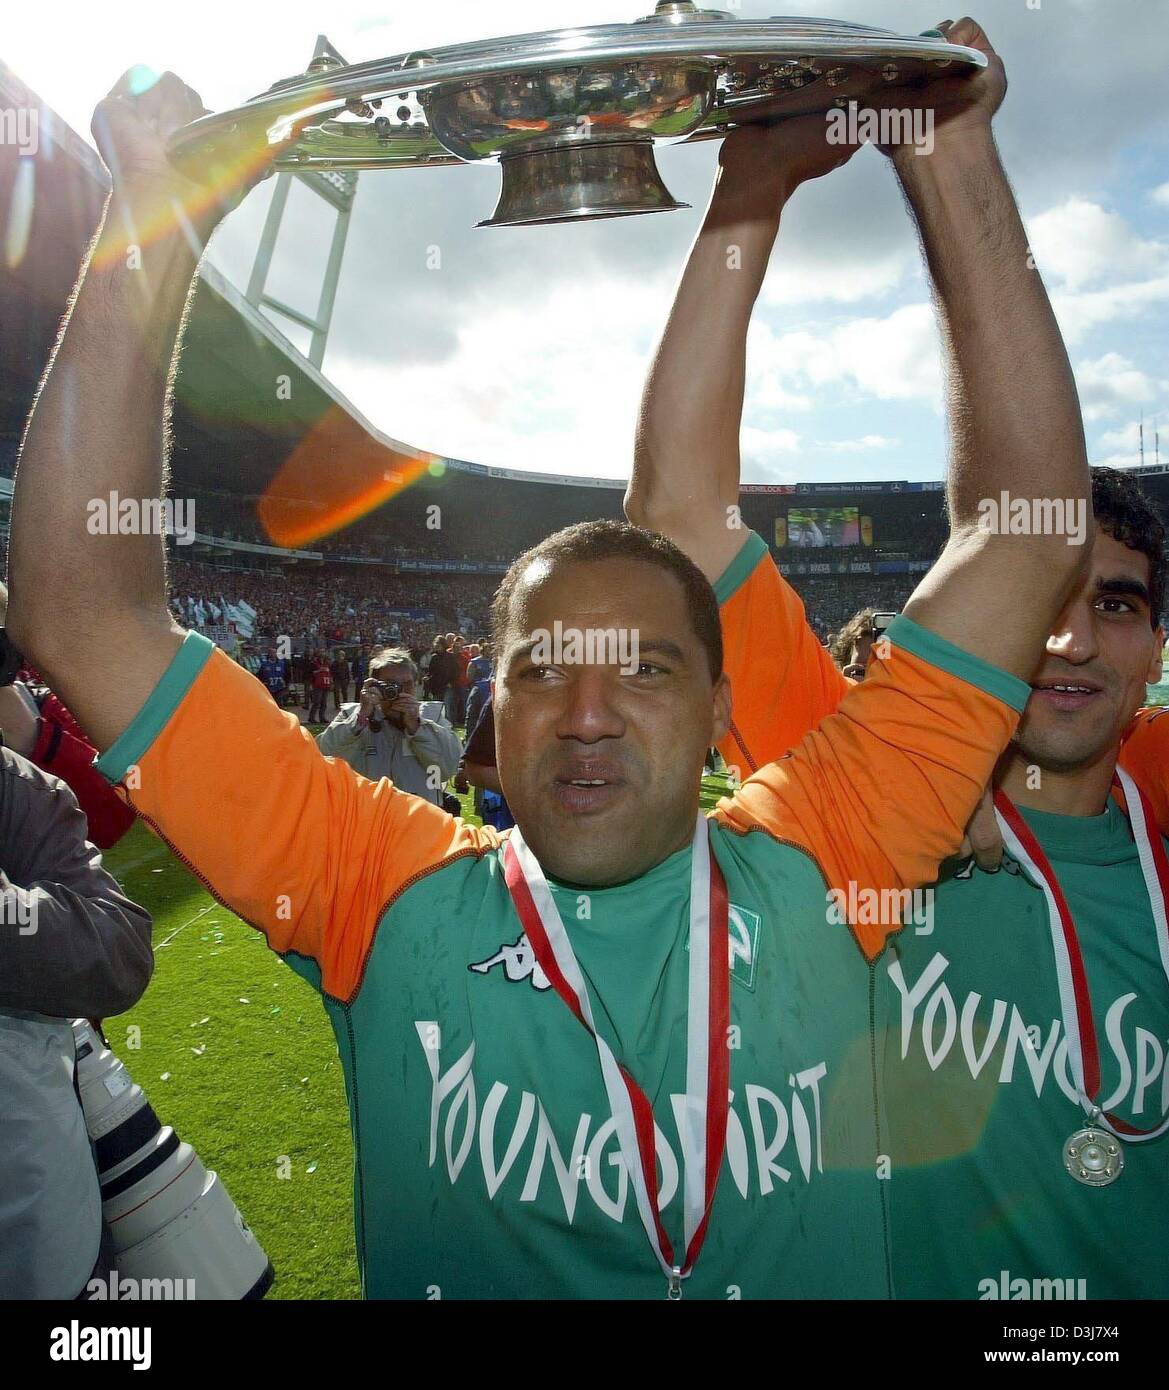 (dpa) - Bremen's Brazilian forward Ailton and Paul Stalteri (R) hold aloft the German Bundesliga champions trophy during celebrations in Bremen, 15 May 2004. after the Bundesliga soccer game opposing SV Werder Bremen and Bayer 04 Leverkusen in Bremen, Germany, 15 May 2004. Bremen lost the game 2-6. However, Bremen had already secured the 2003/2004 Bundesliga champion's title in the Stock Photo